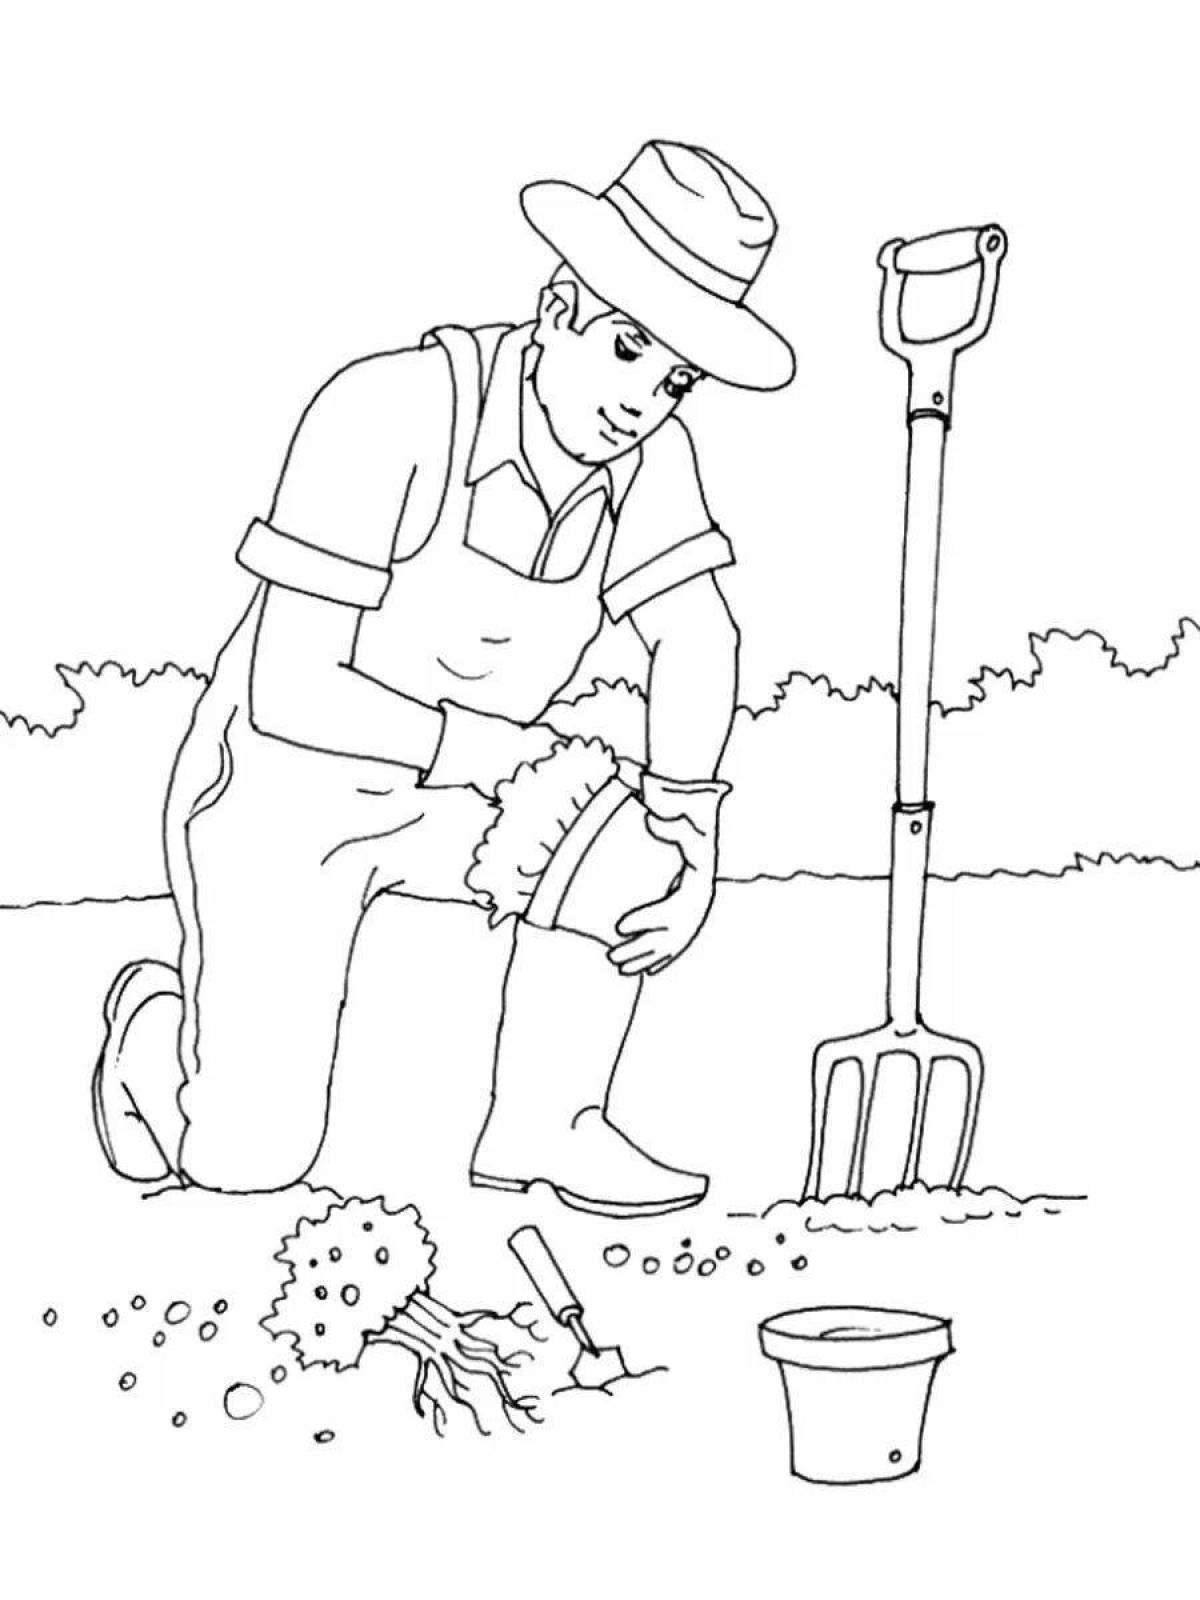 Adorable gardener coloring page for kids